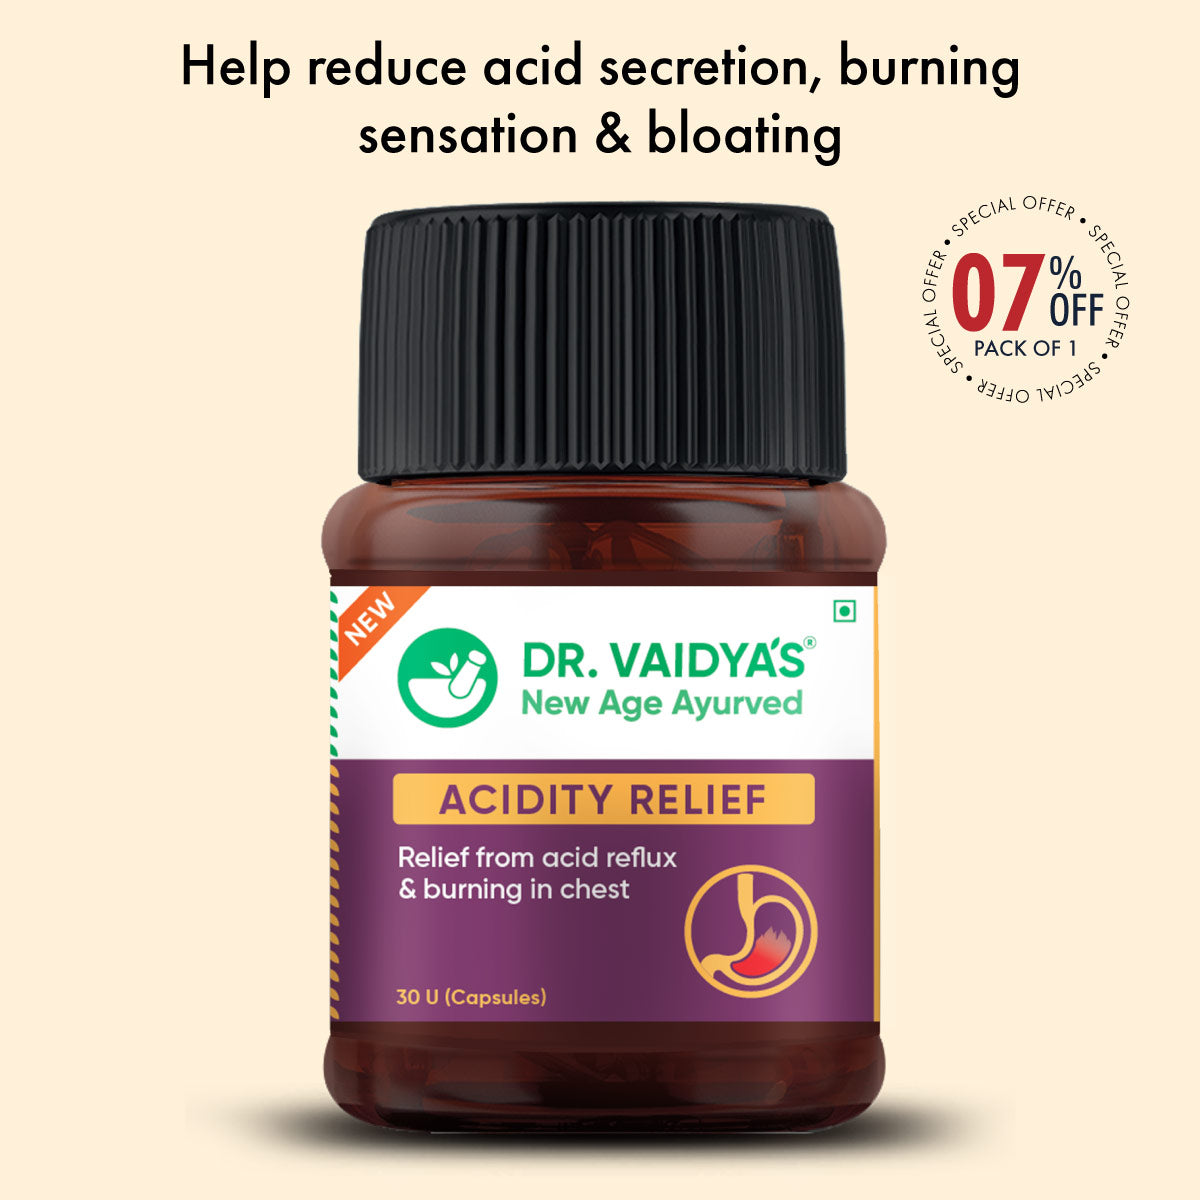 Acidity Relief: For Fast & Long-Lasting Relief From Acidity